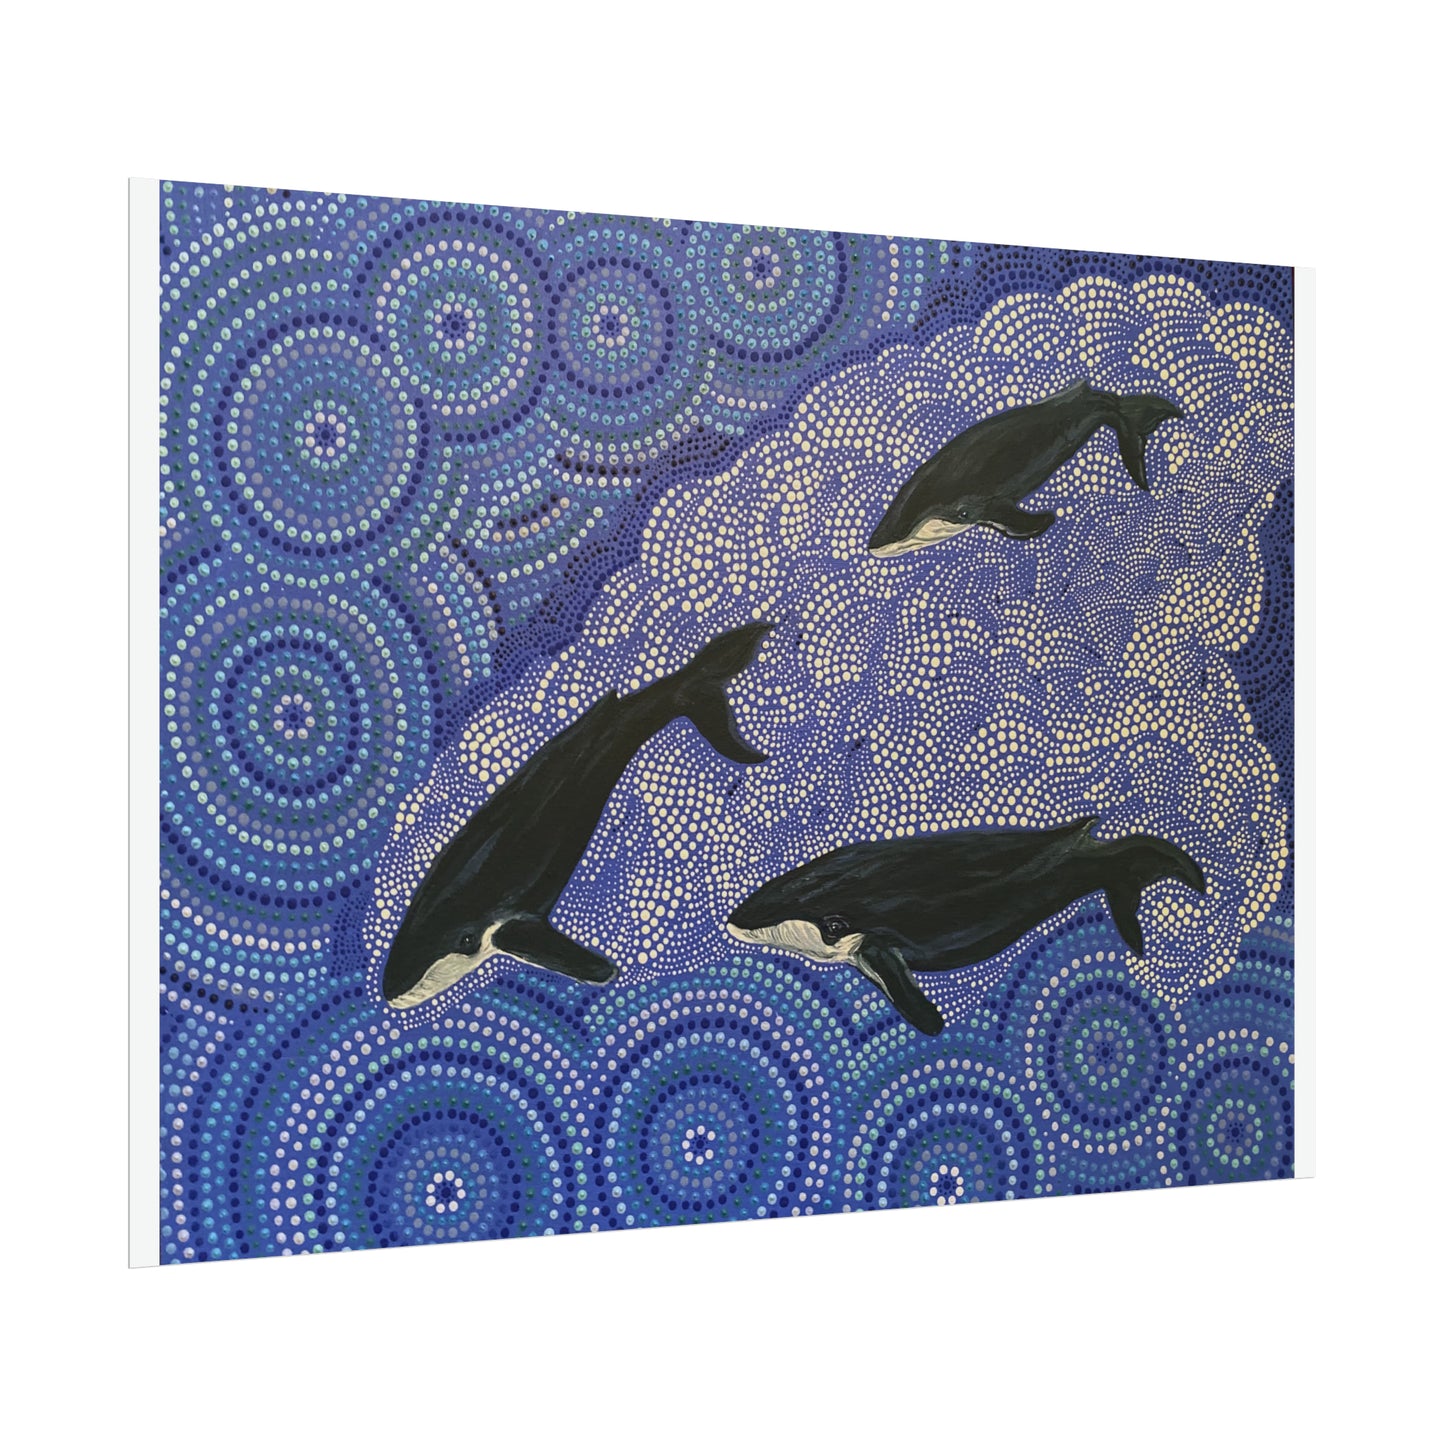 Three Whales at Long Reef Artist Kim's Dot Paintings Rolled Poster